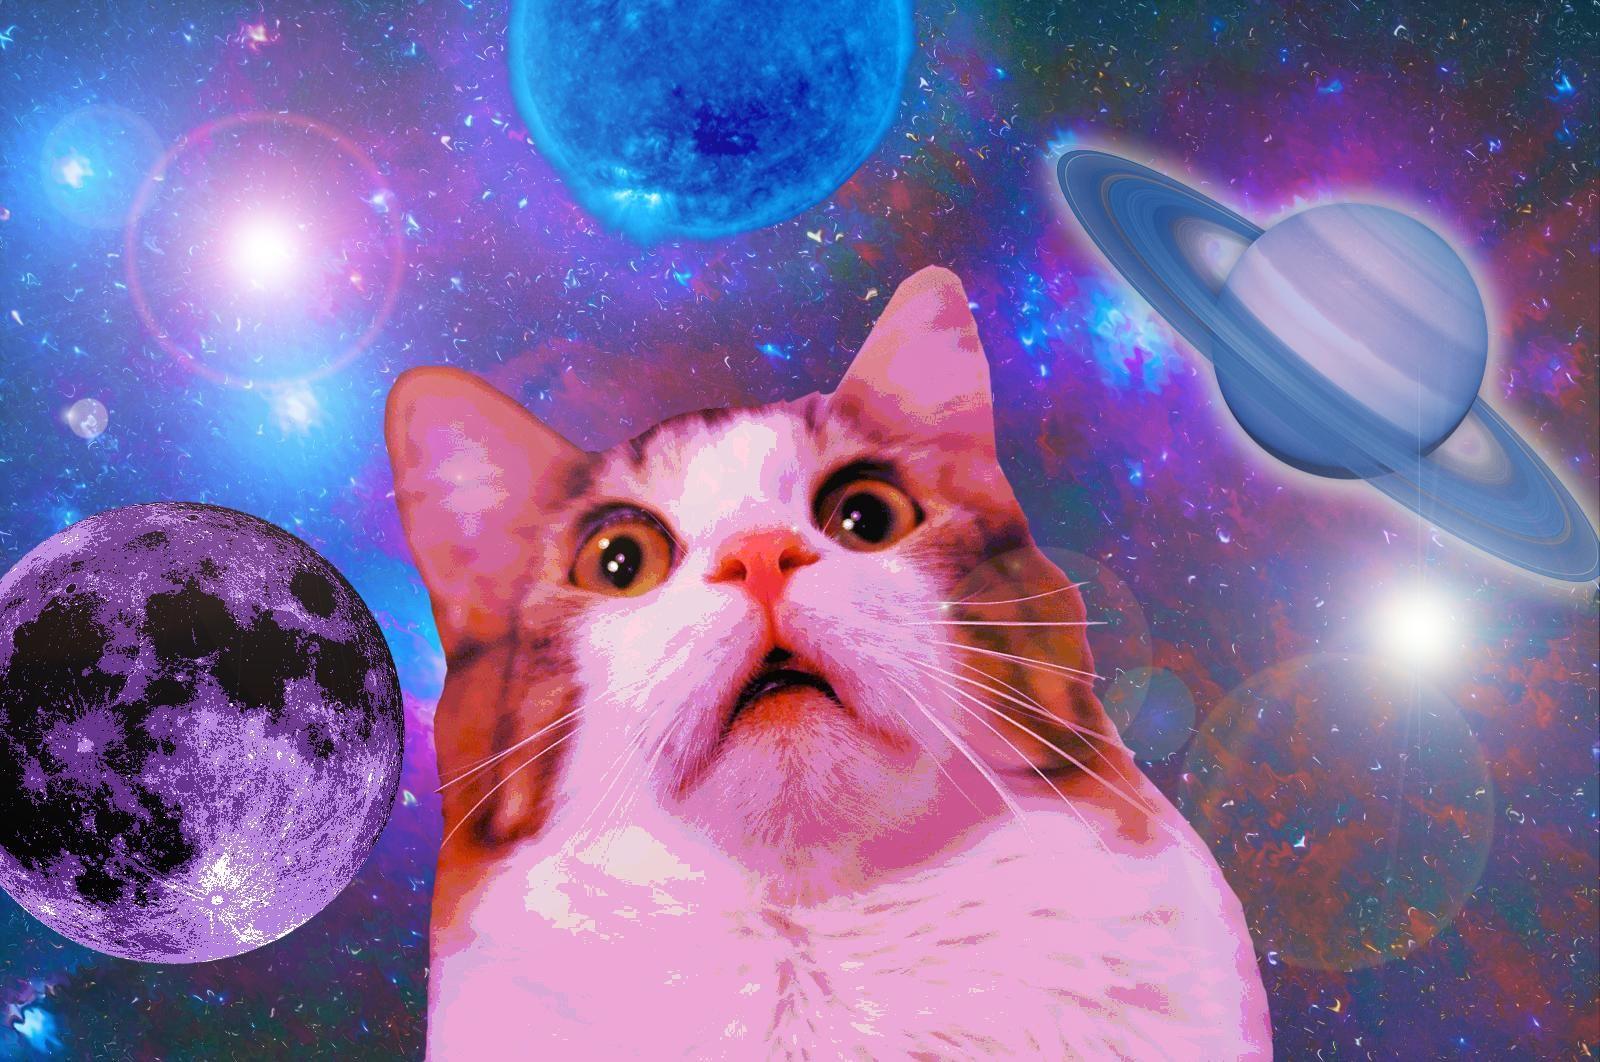 Space Cat Wallpapers For Iphone For Desktop Wallpapers 1600 x 1062 px